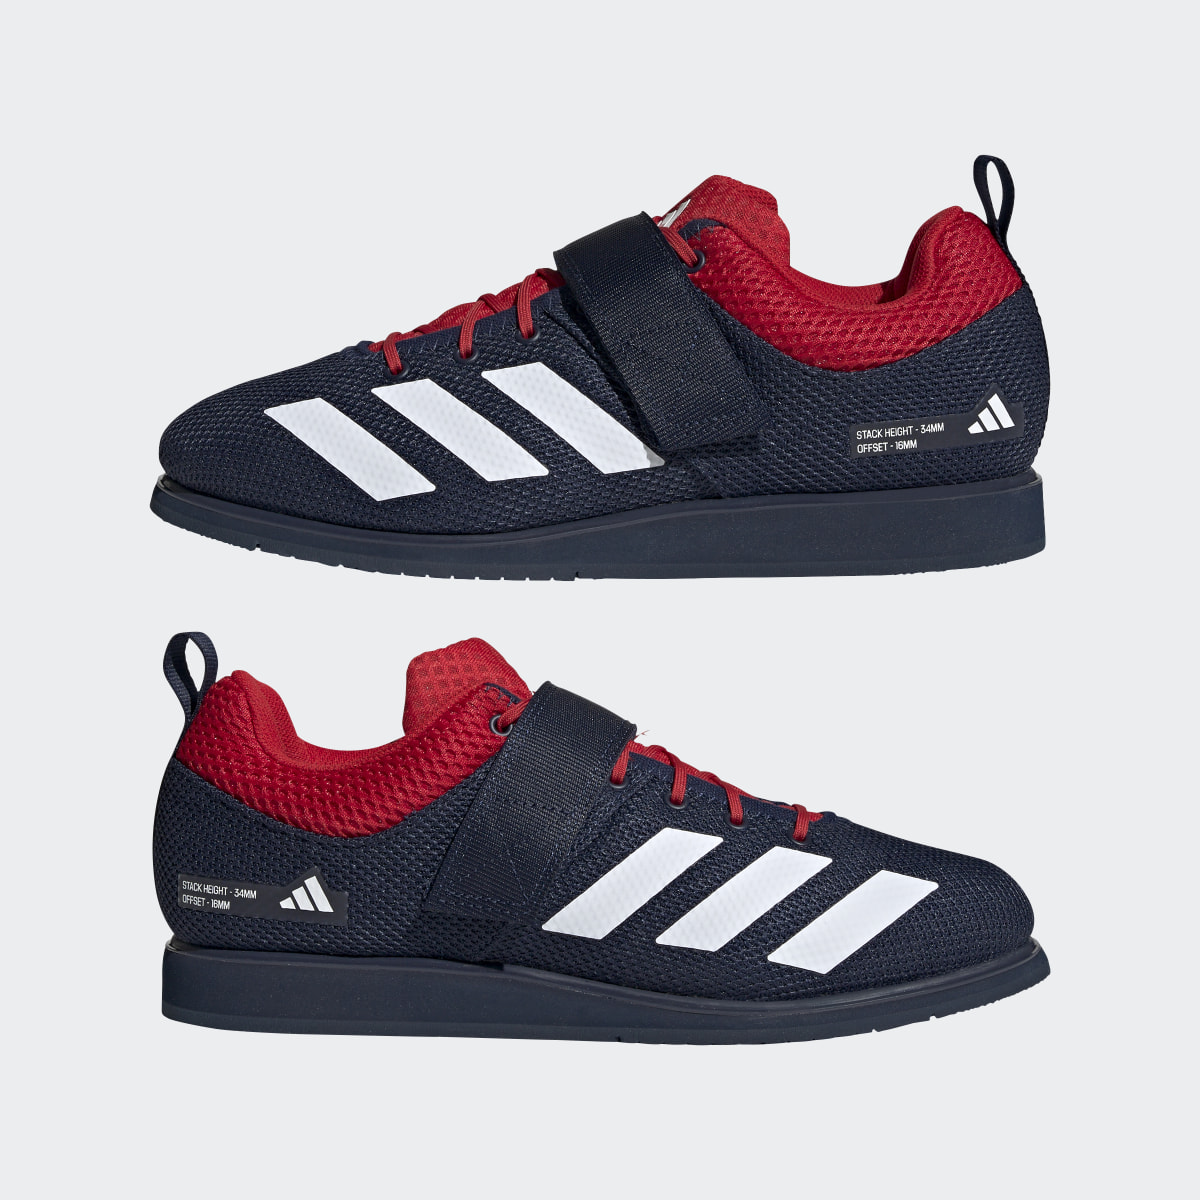 Adidas Powerlift 5 Weightlifting Shoes. 8